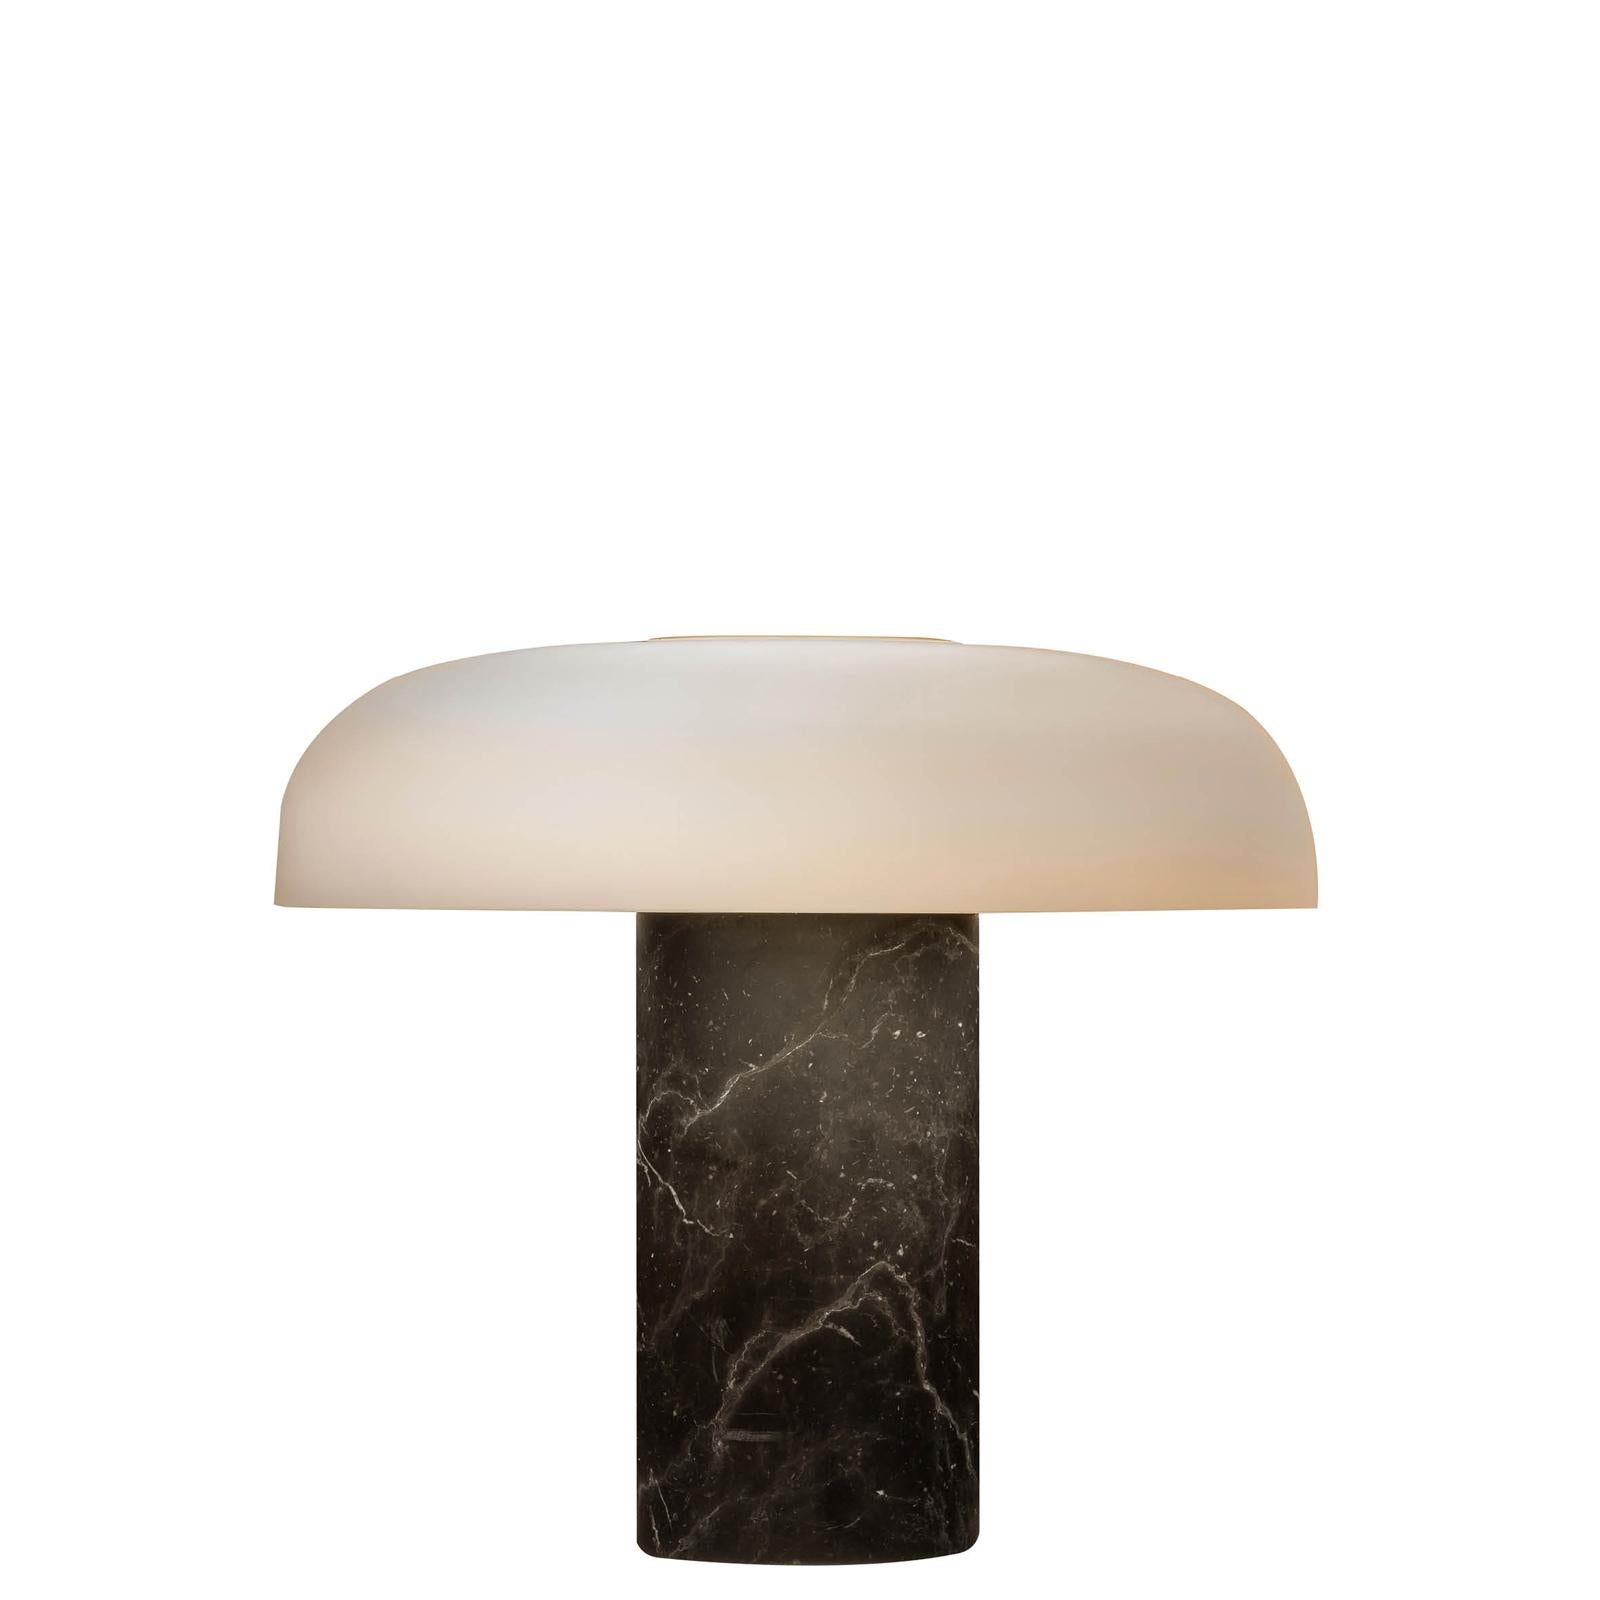 Studio Buratti 'Tropico' black marble & glass table lamp for Fontana Arte. 

Executed in high quality marble, thick etched hand blown opaline glass and galvanized glossy black metal. The 